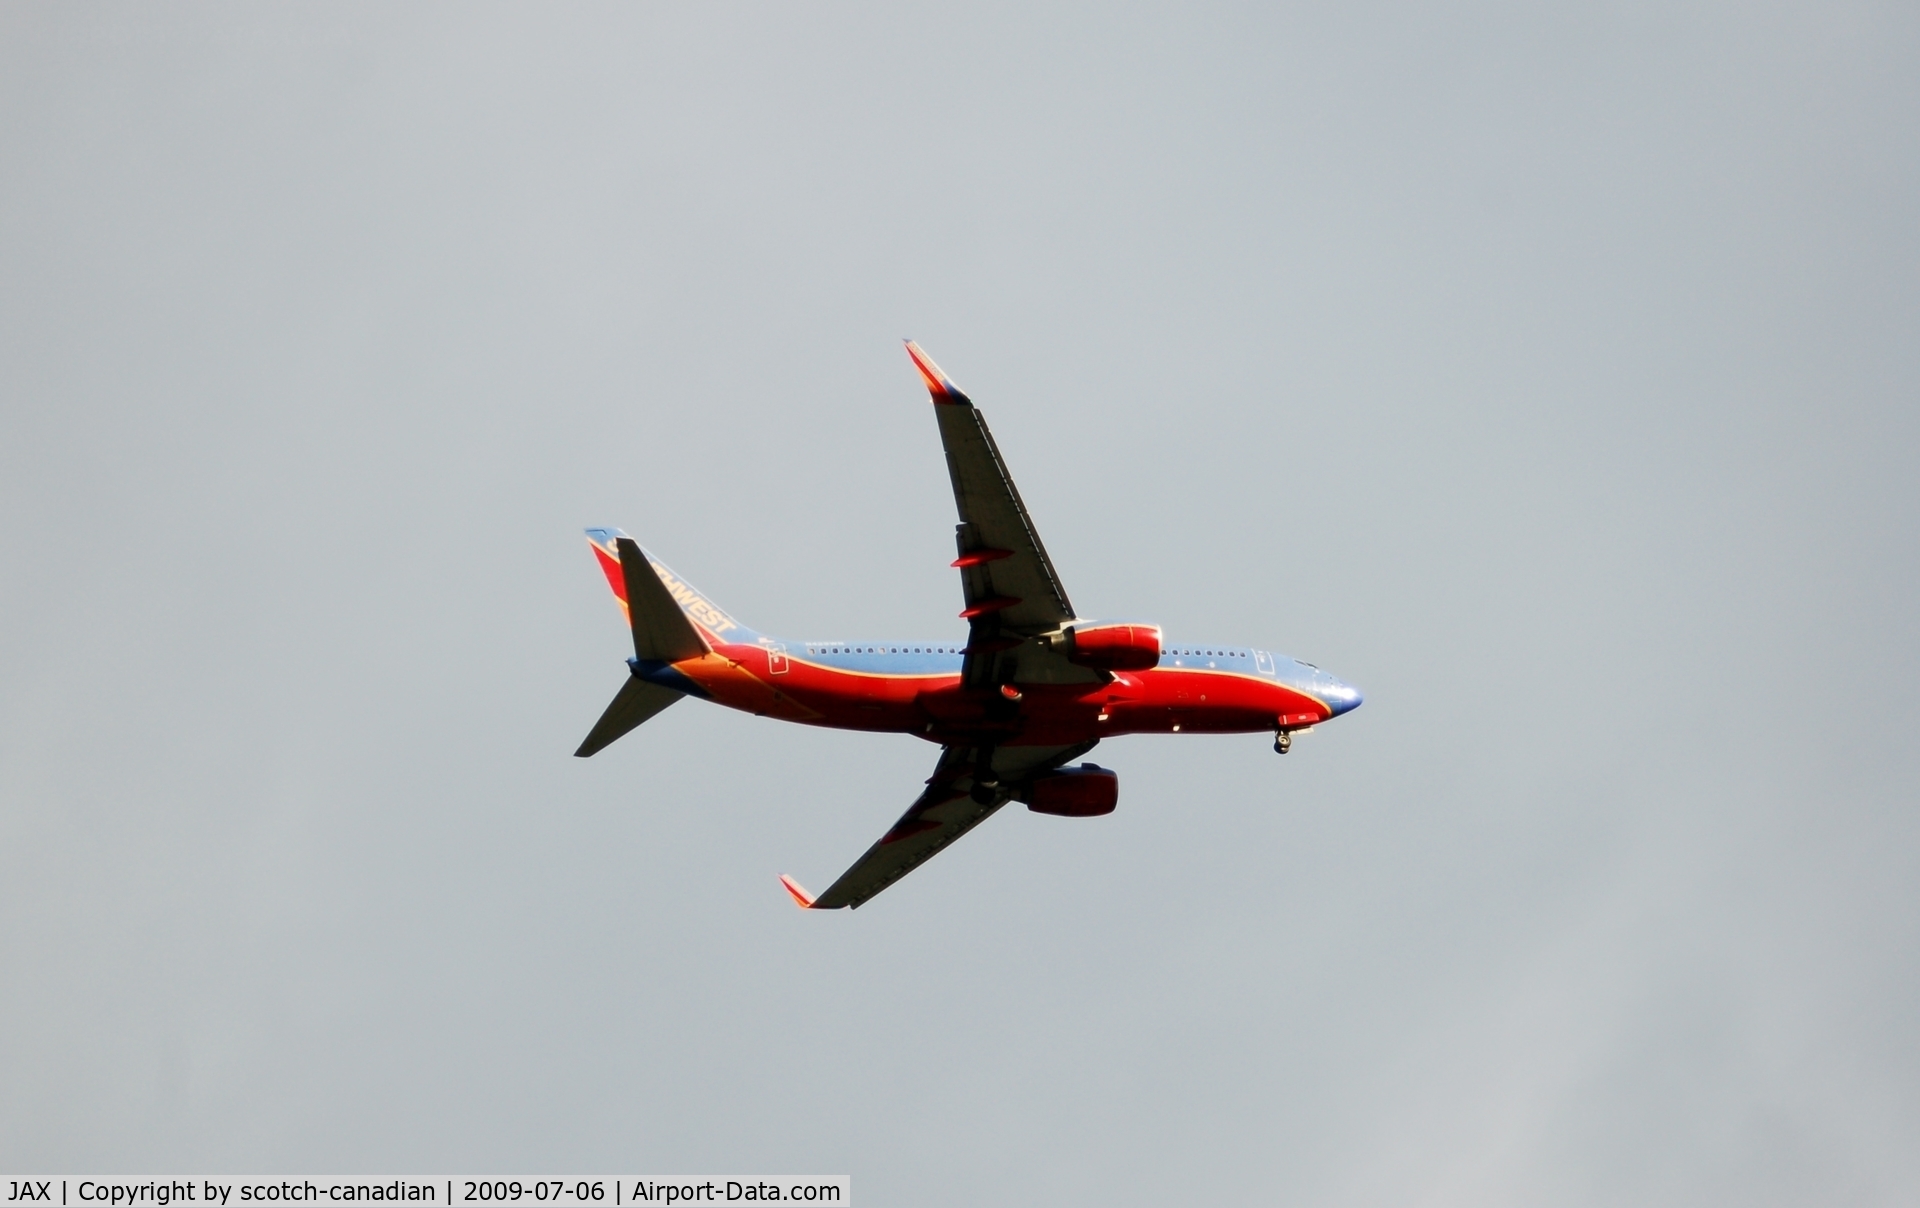 Jacksonville International Airport (JAX) - Southwest Airlines Jet on Final Approach to Jacksonville International Airport, Jacksonville, FL